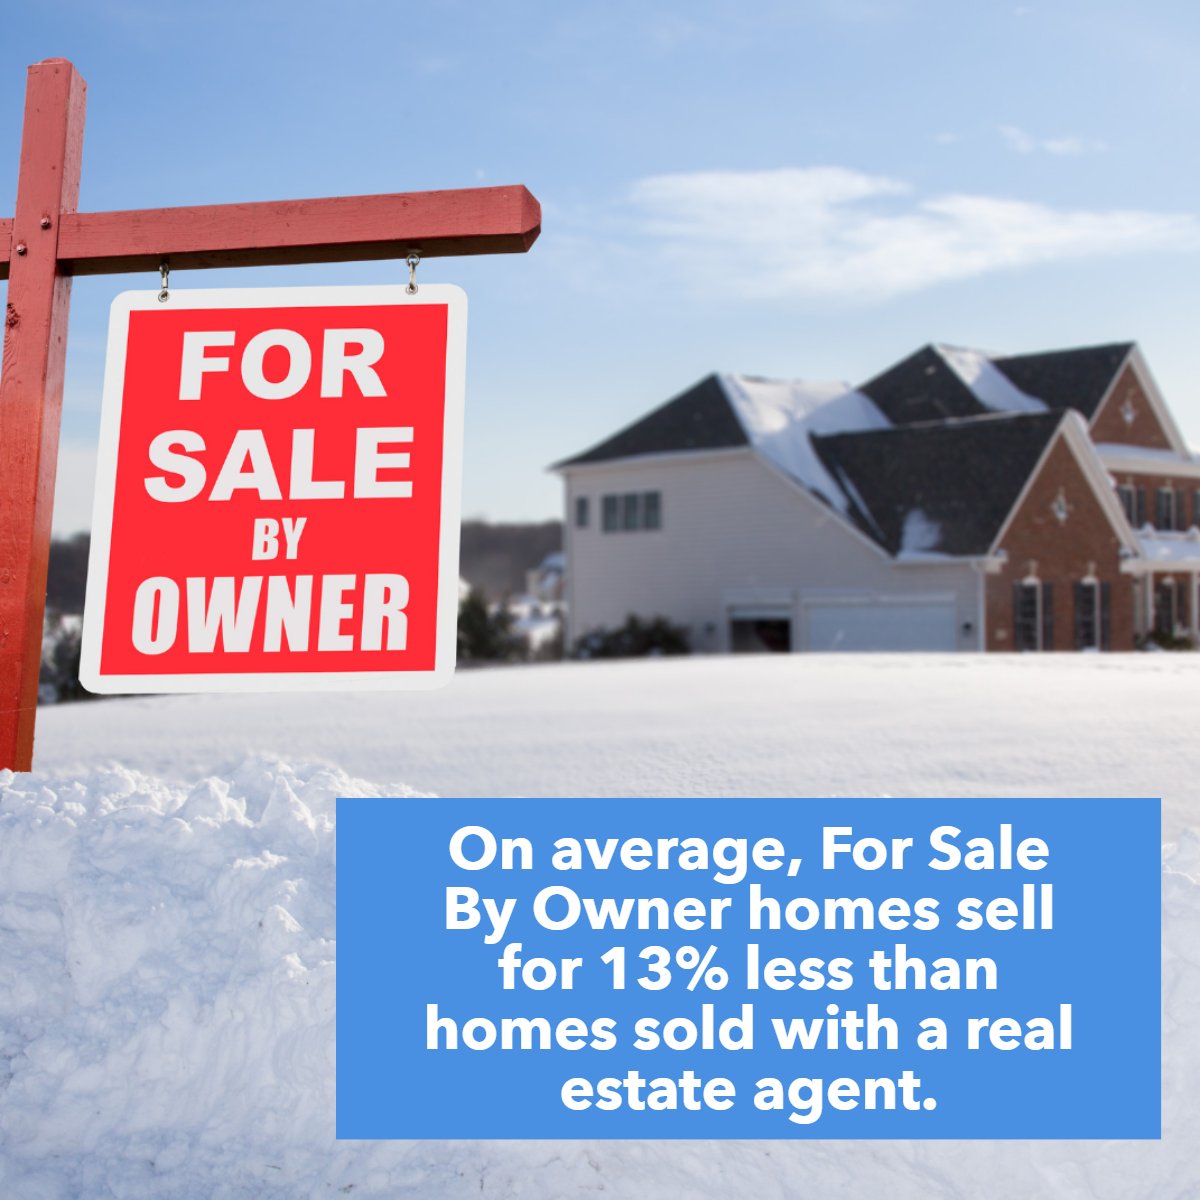 Did you know this? 😱

#FSBO    #sold    #realestate    #fact
#realtynewengland #mannymenezesgroup #realtyne #wesellnewengland #welovenewengland #ilovenewengland #massrealestate #rirealestate #nhrealestate #ctrealestate #wesellhomes #vtrealestate